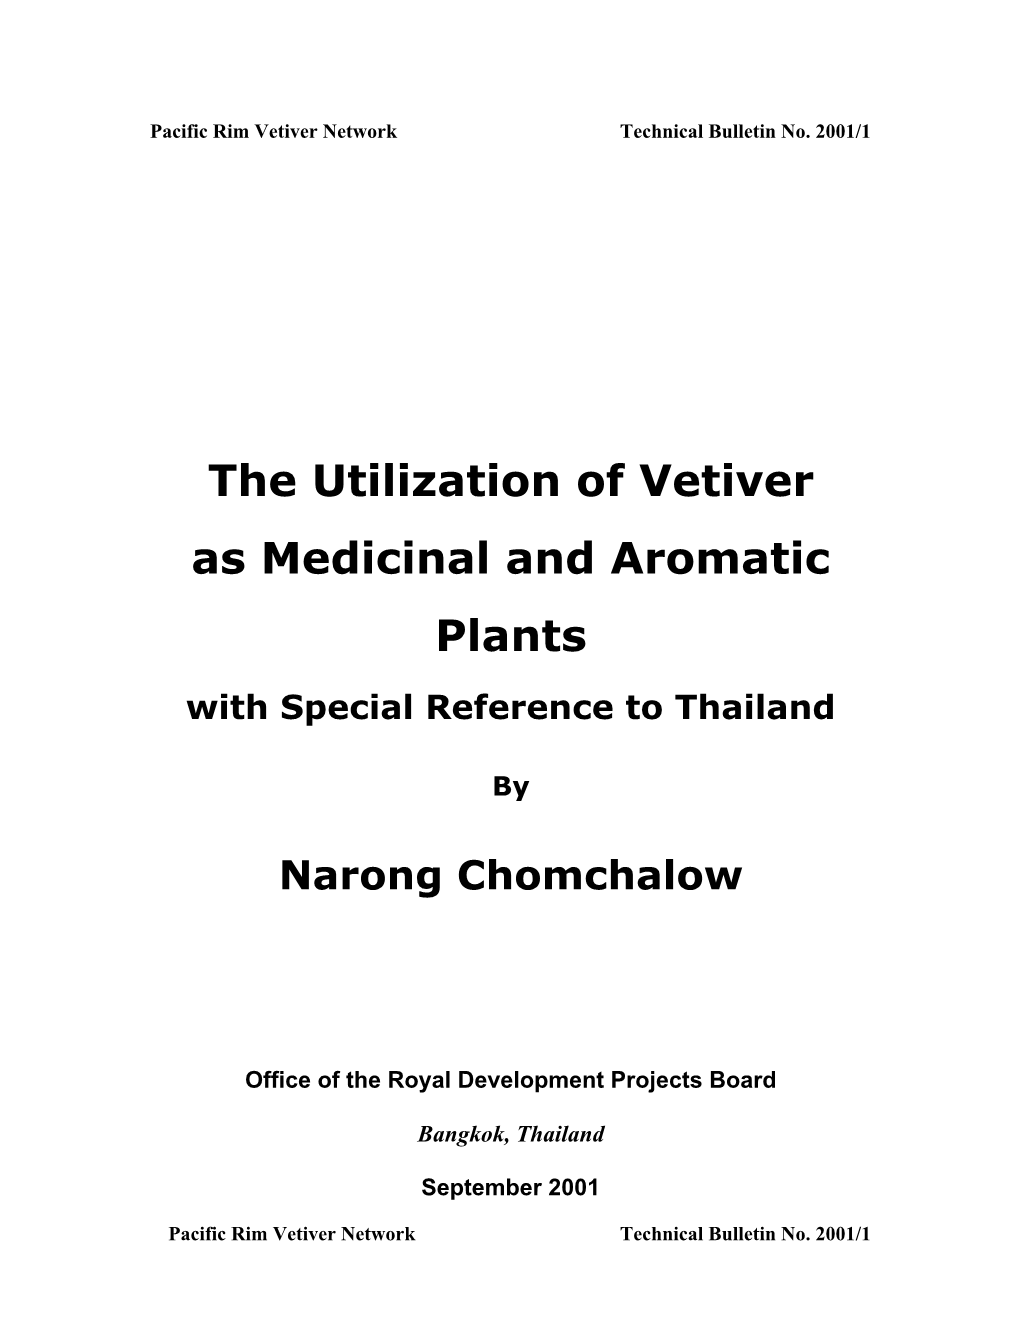 The Utilization of Vetiver As Medicinal and Aromatic Plants with Special Reference to Thailand